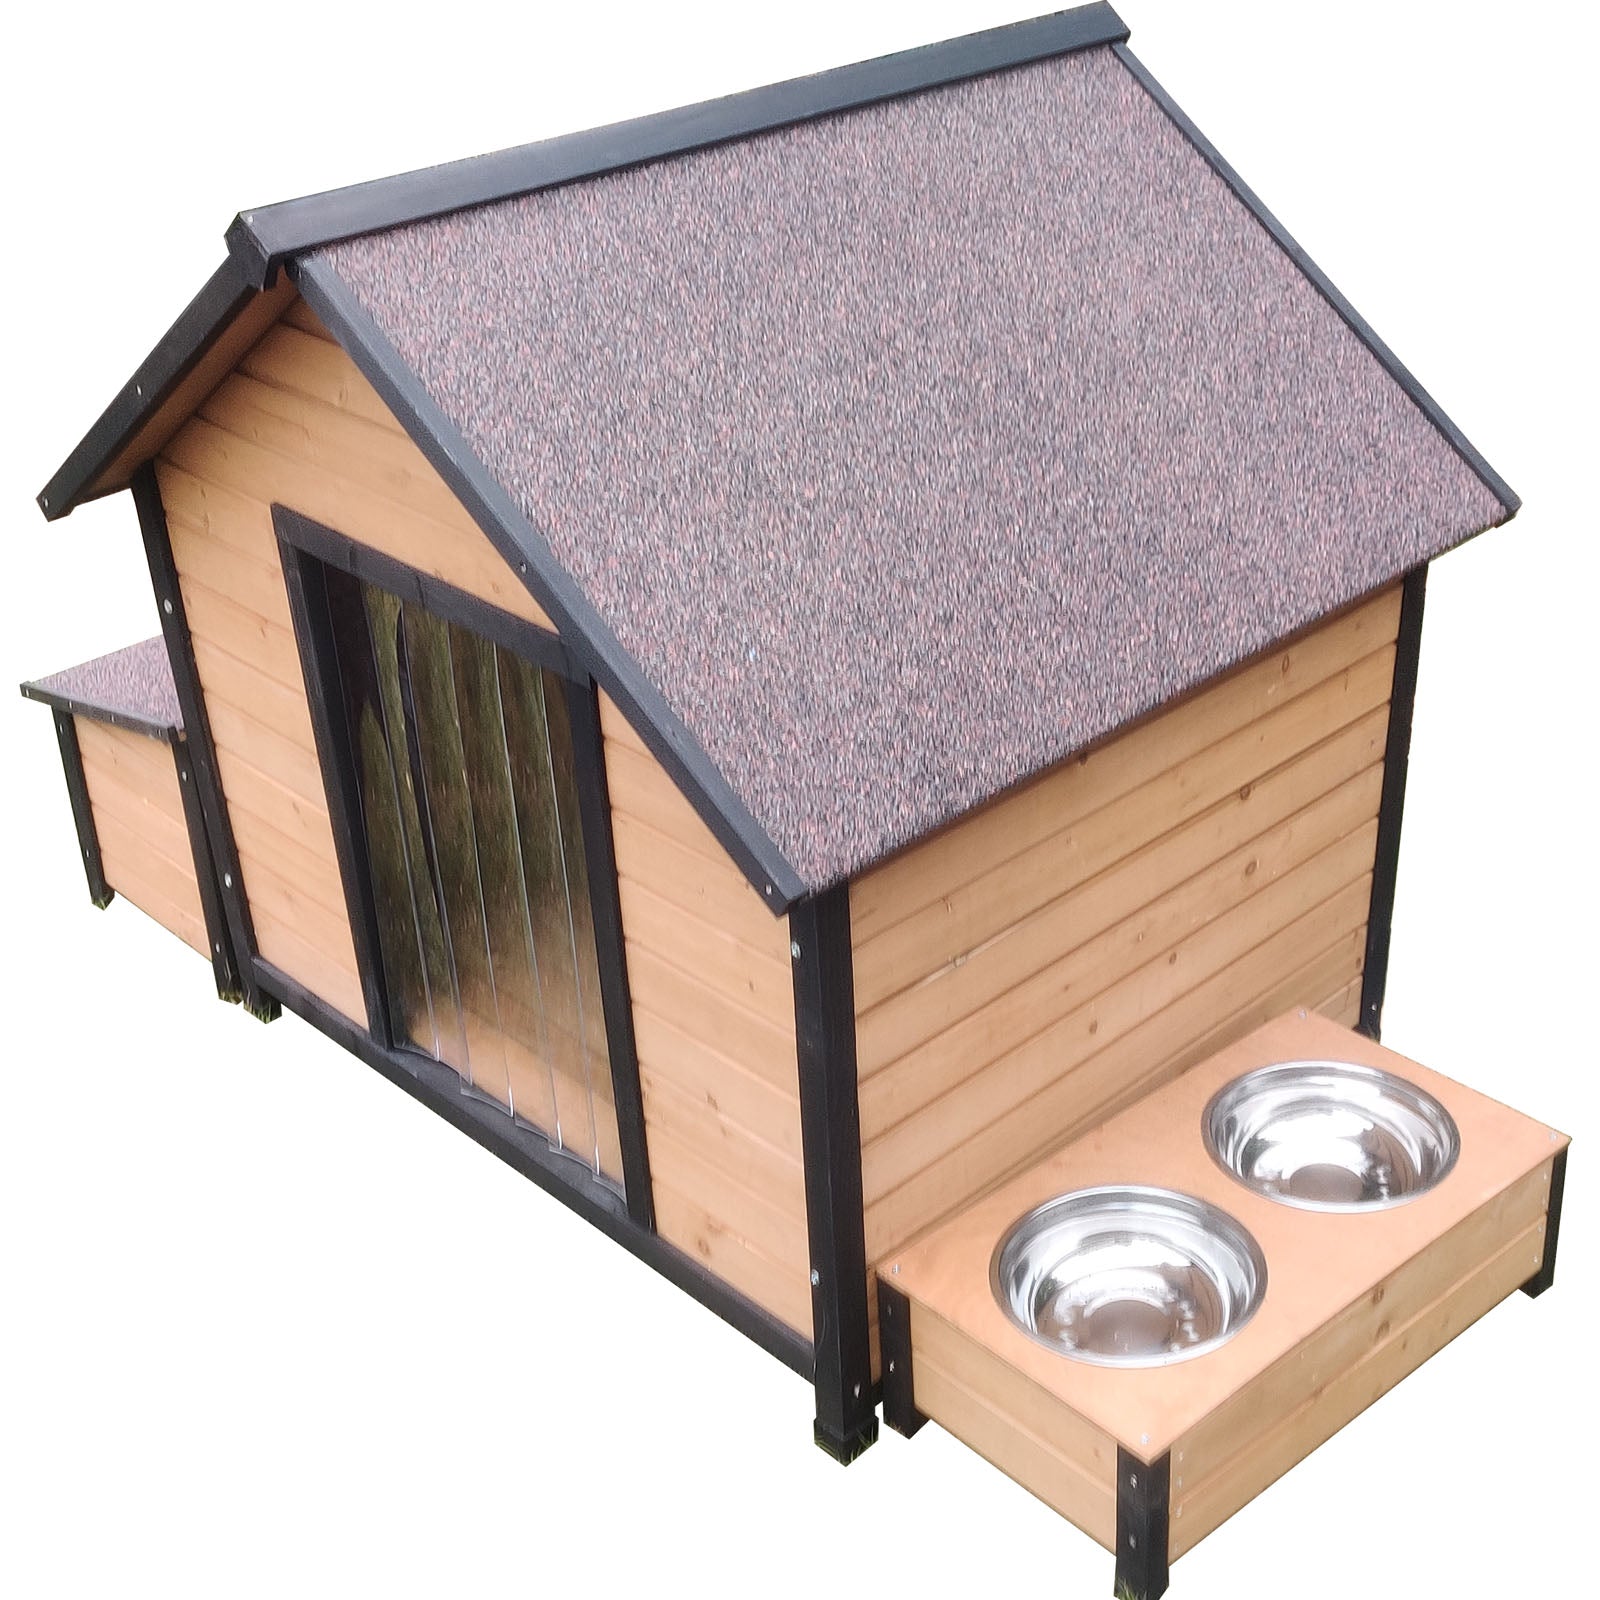 The 11 Best Dog Houses and Outdoor Kennels for Your Pup